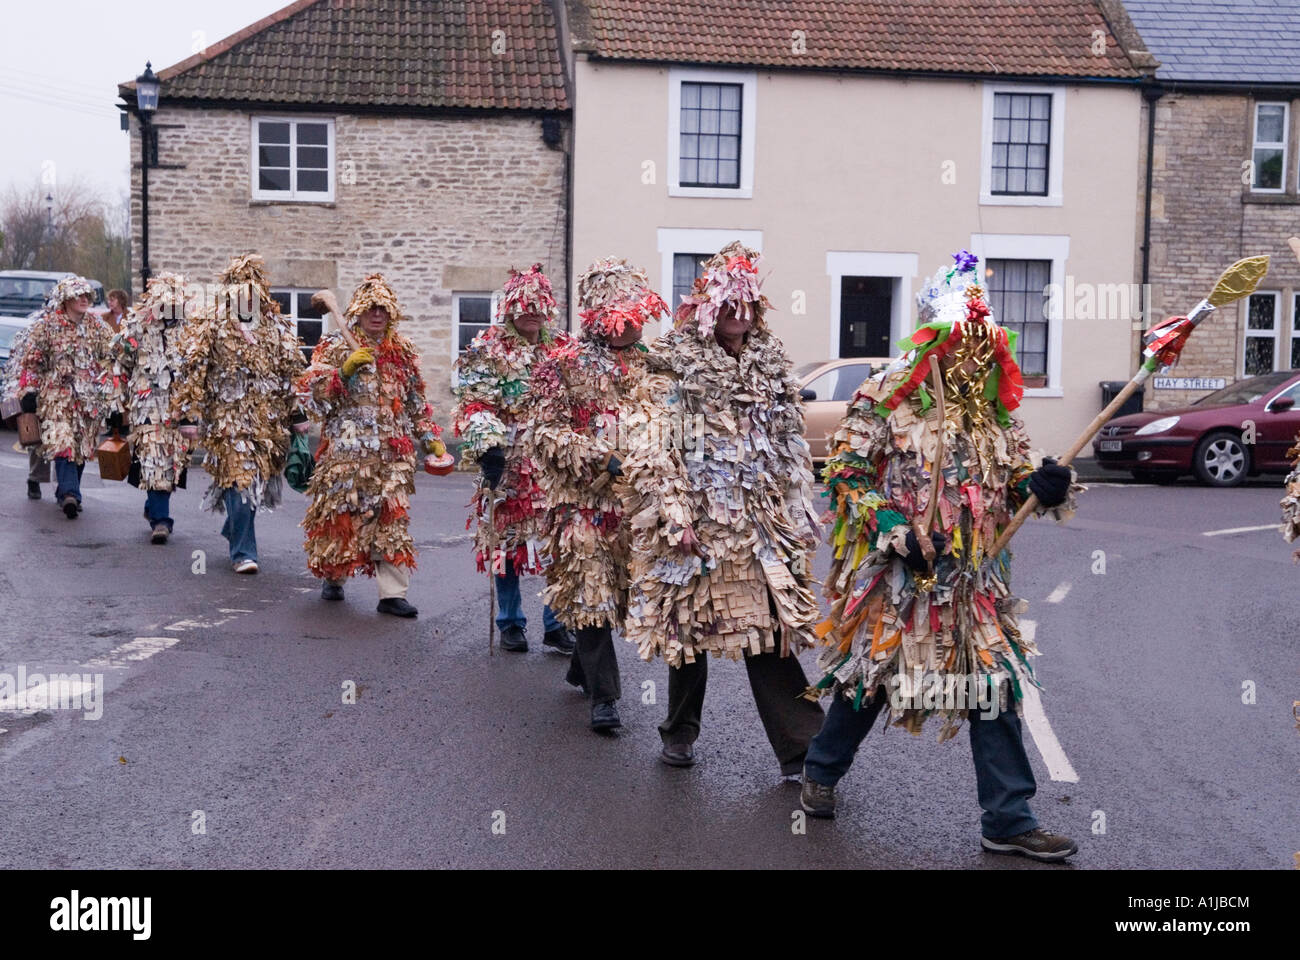 Marshfield Mummers Boxing Day performance Gloucestershire England  Process to first performance December 26th annually. HOMER SYKES Stock Photo